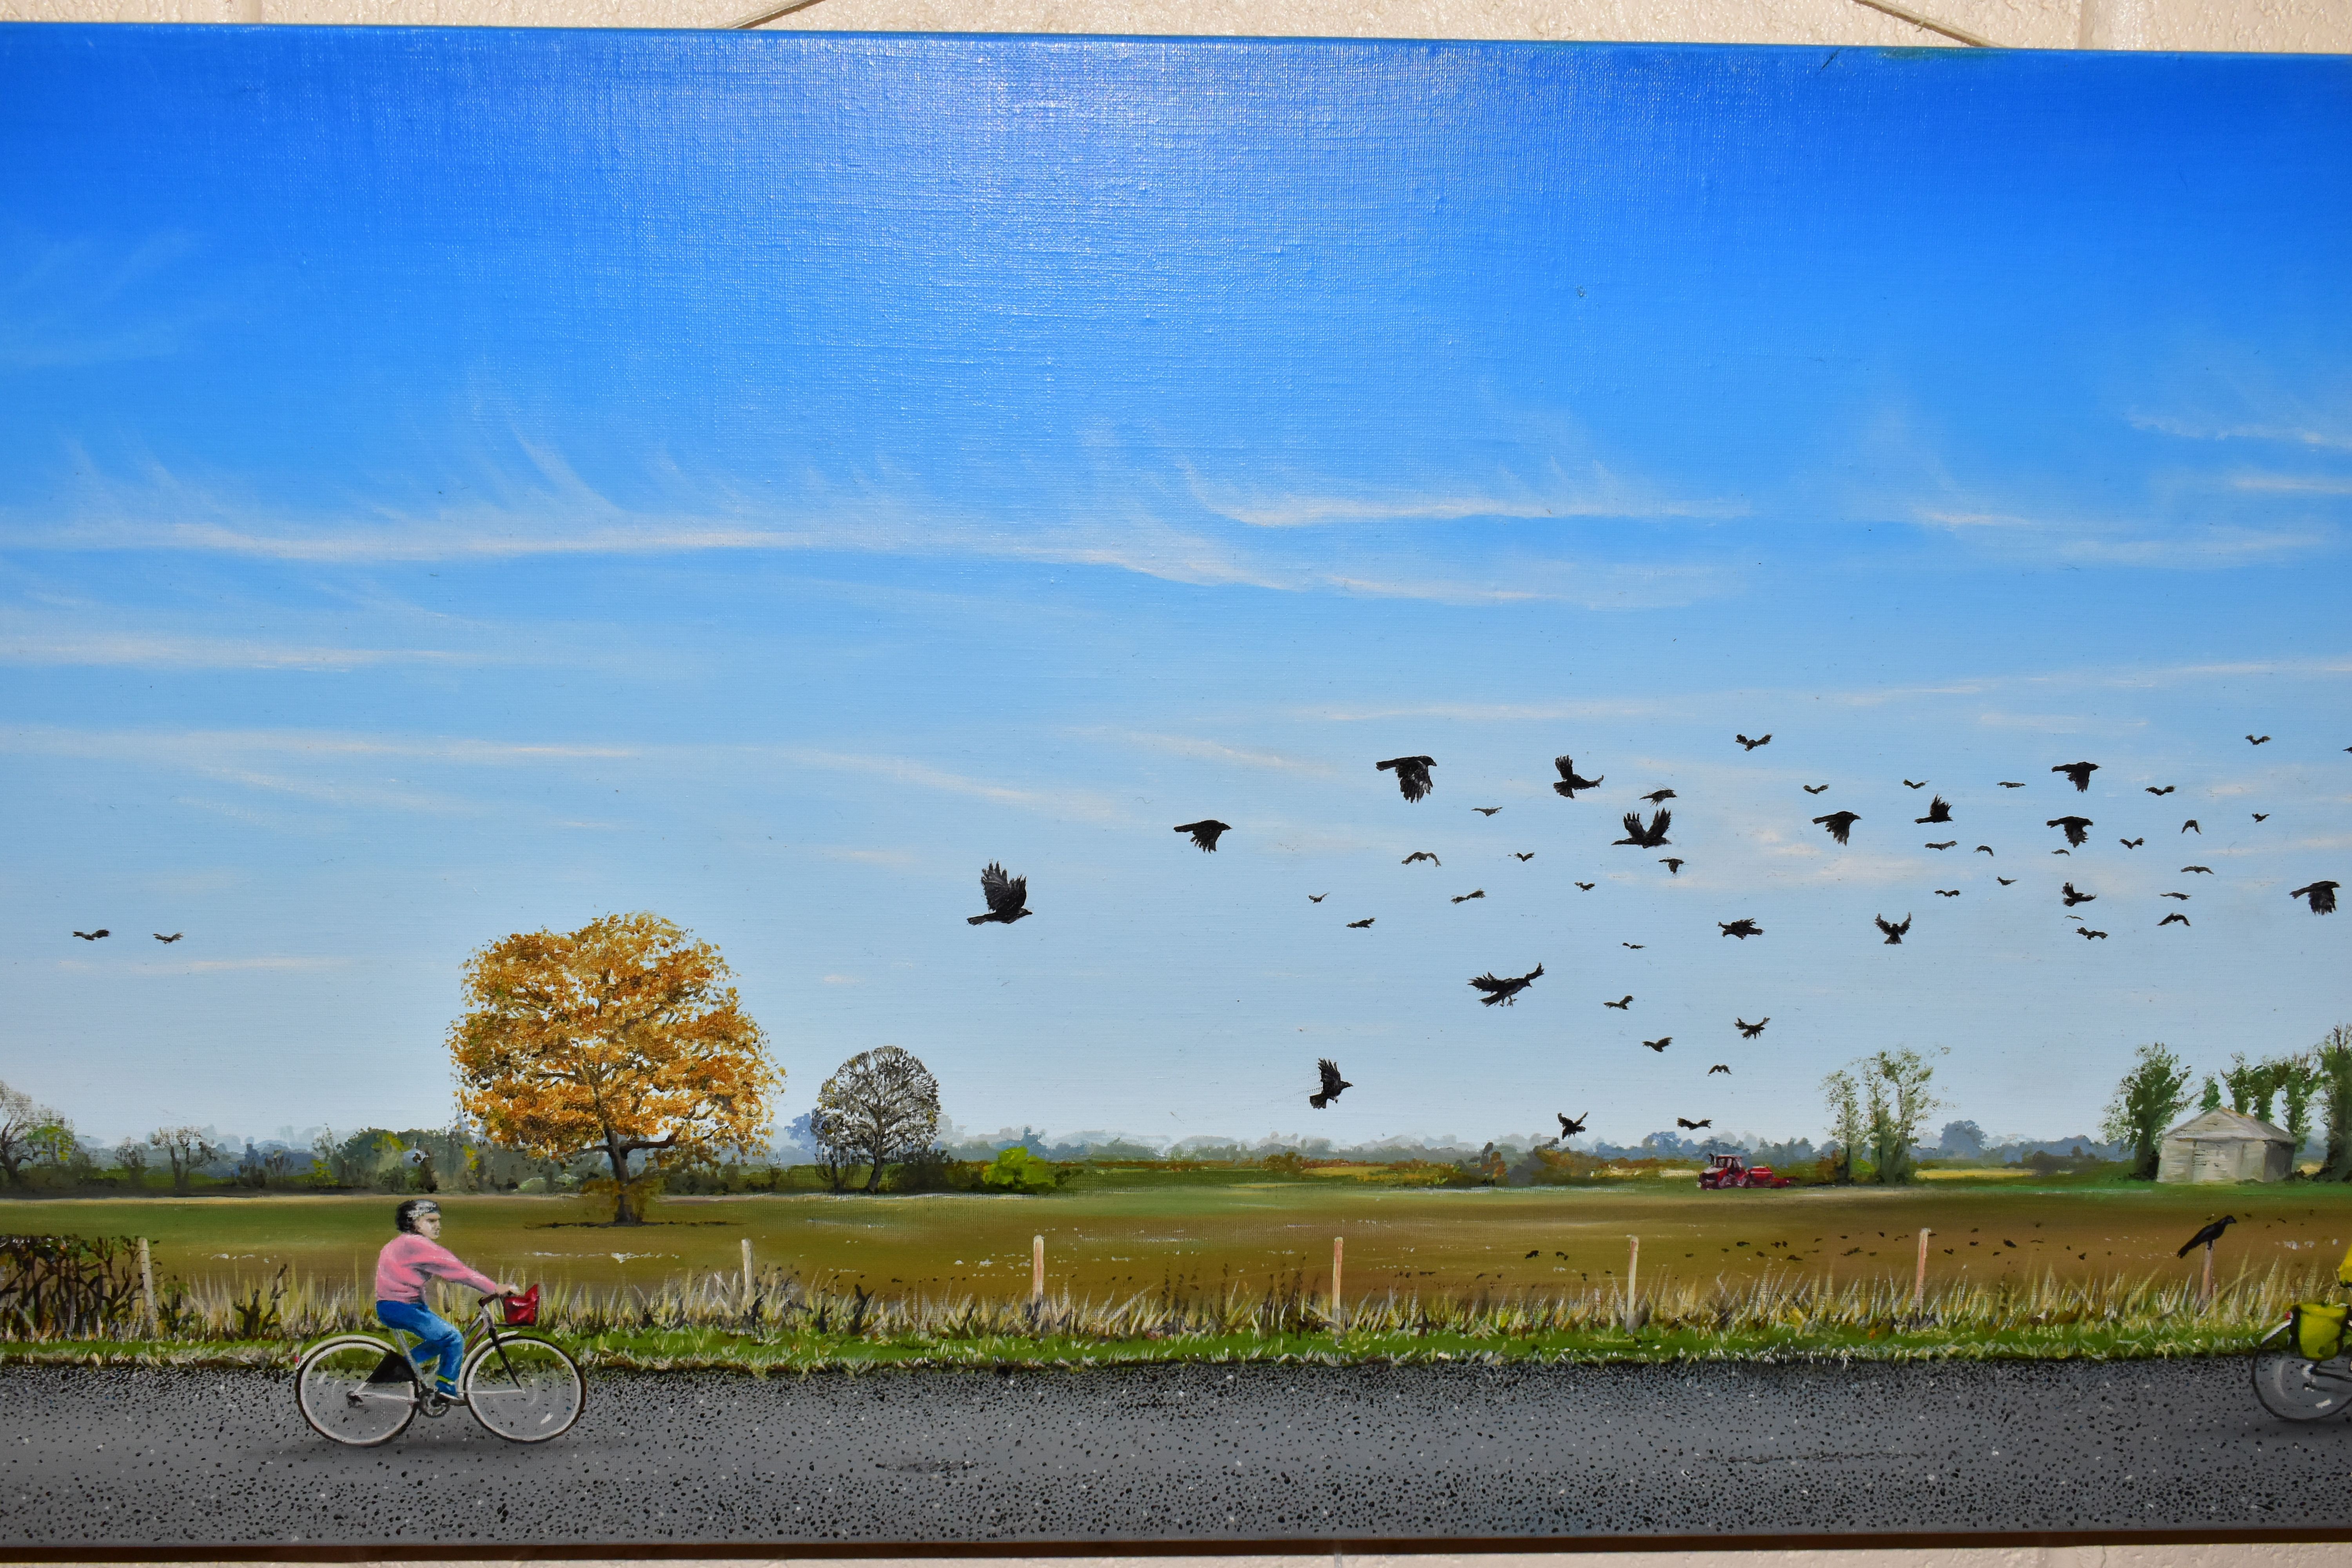 D. MITCHELL (CONTEMPORARY) CYCLISTS RIDING ALONG A RURAL ROAD, signed and dated bottom right 2002, - Image 5 of 5